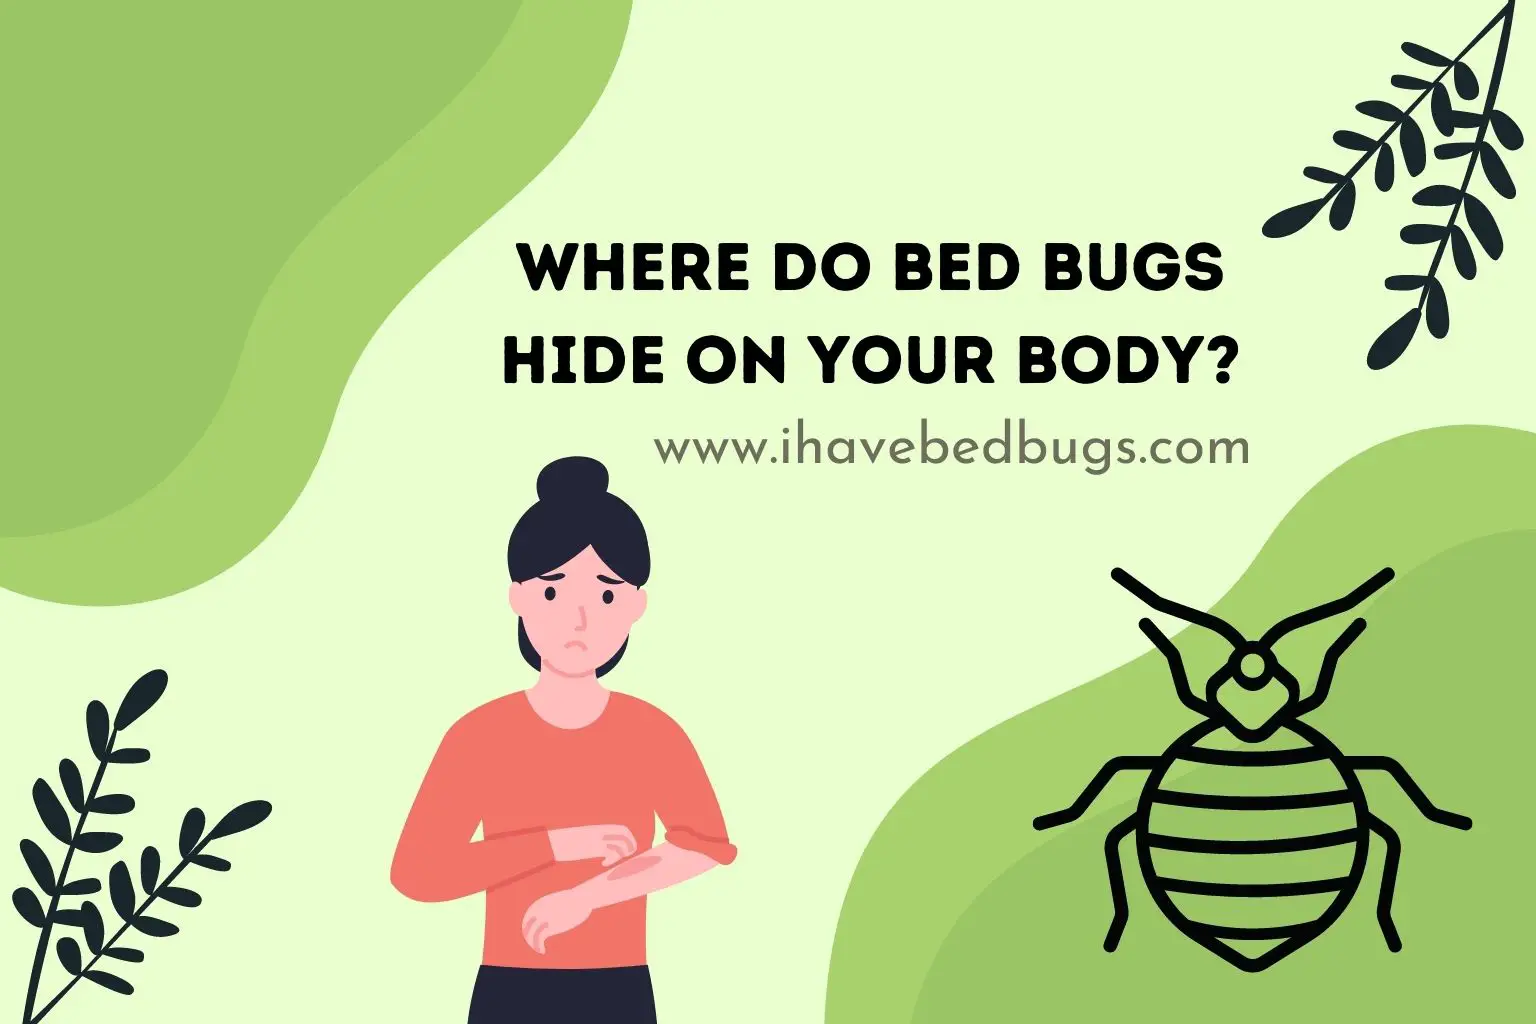 Where do bed bugs hide on your body